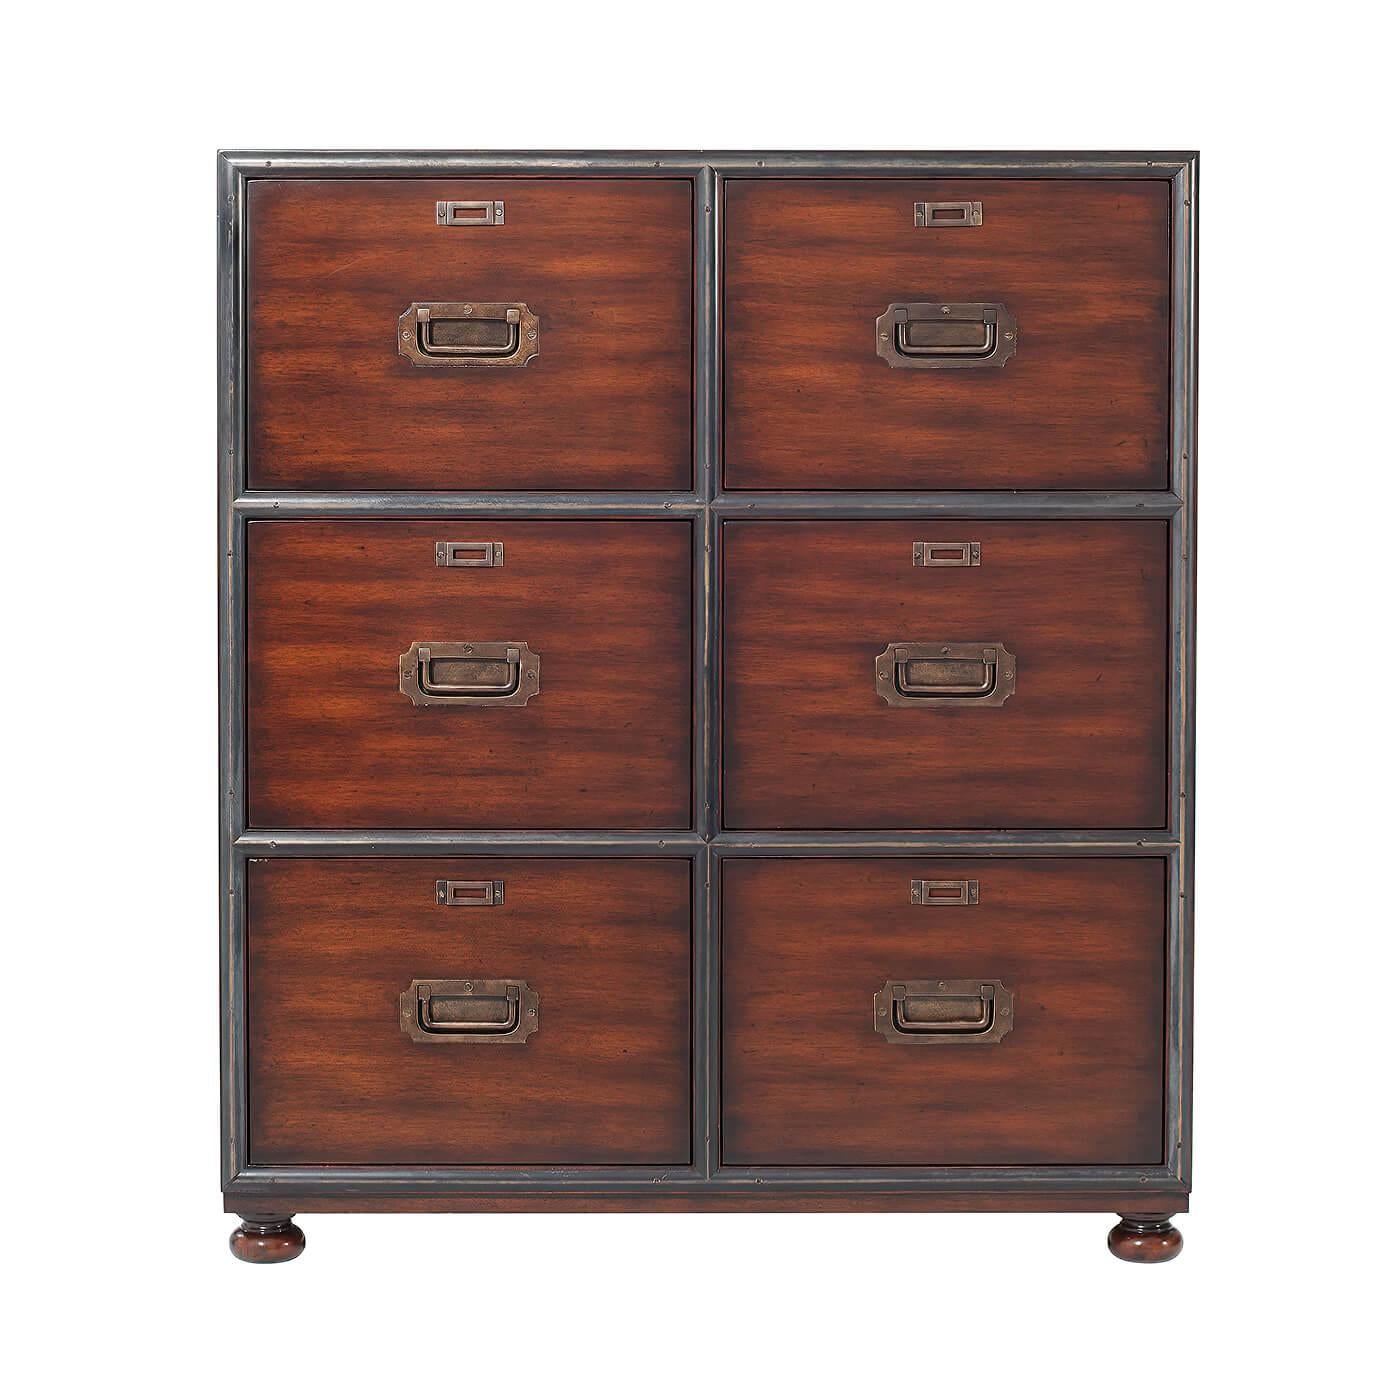 A Campaign style six drawer chest or filing cabinet. Fits A4 and letter hanging folders. With brass hardware, drawers on runners and raised on bun feet.
Dimensions: 34.25